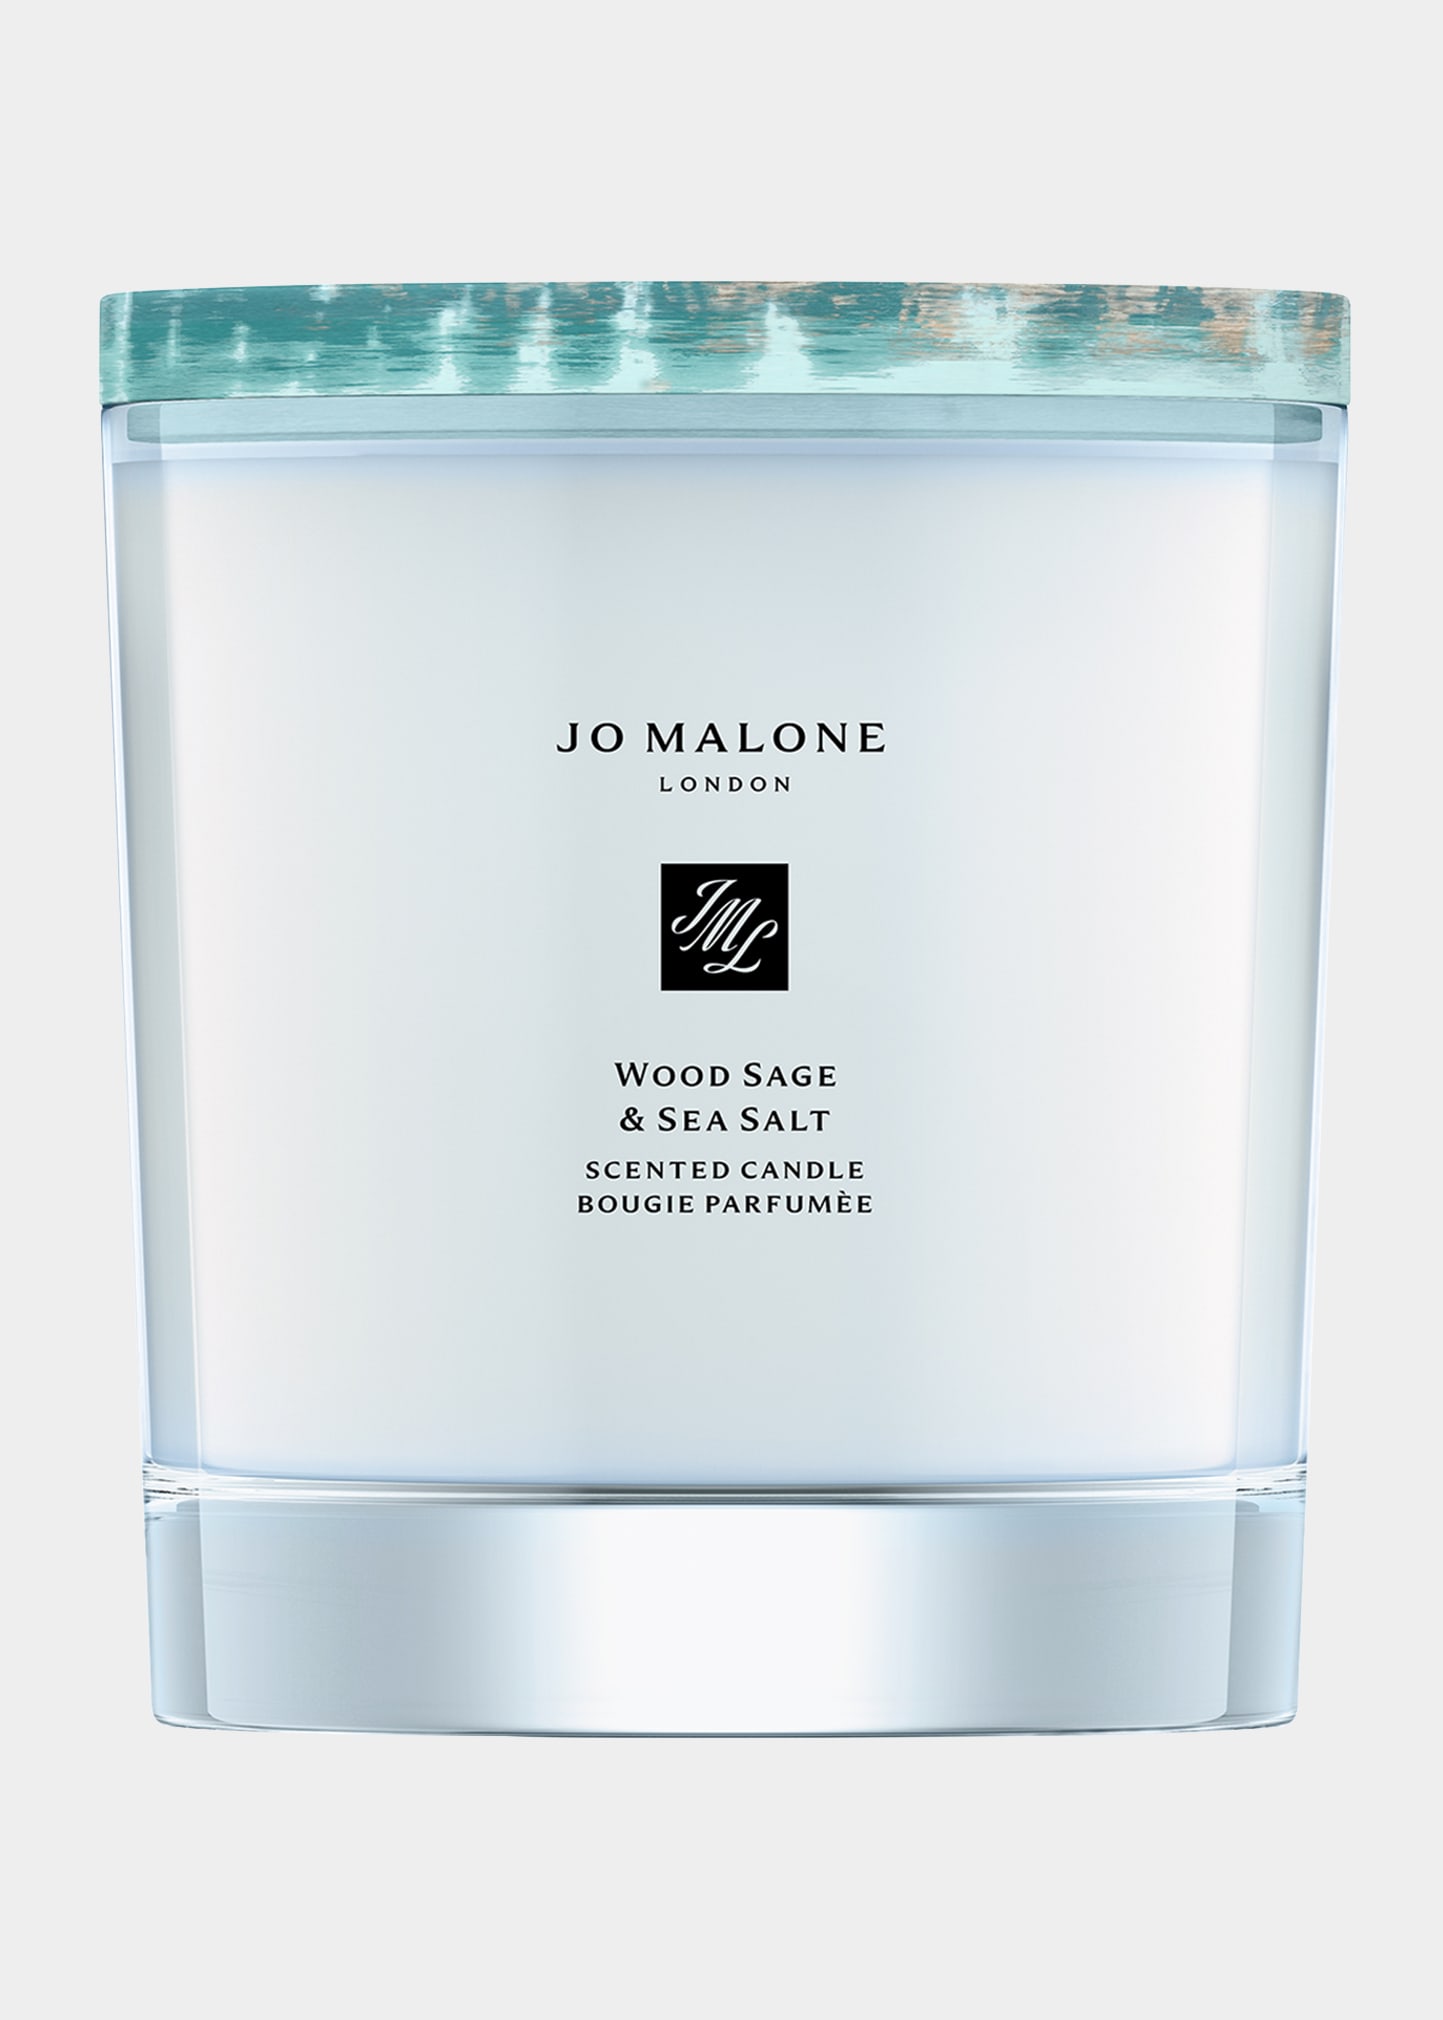 Jo Malone London Special-edition Wood Sage & Sea Salt Home Candle 7 Oz.